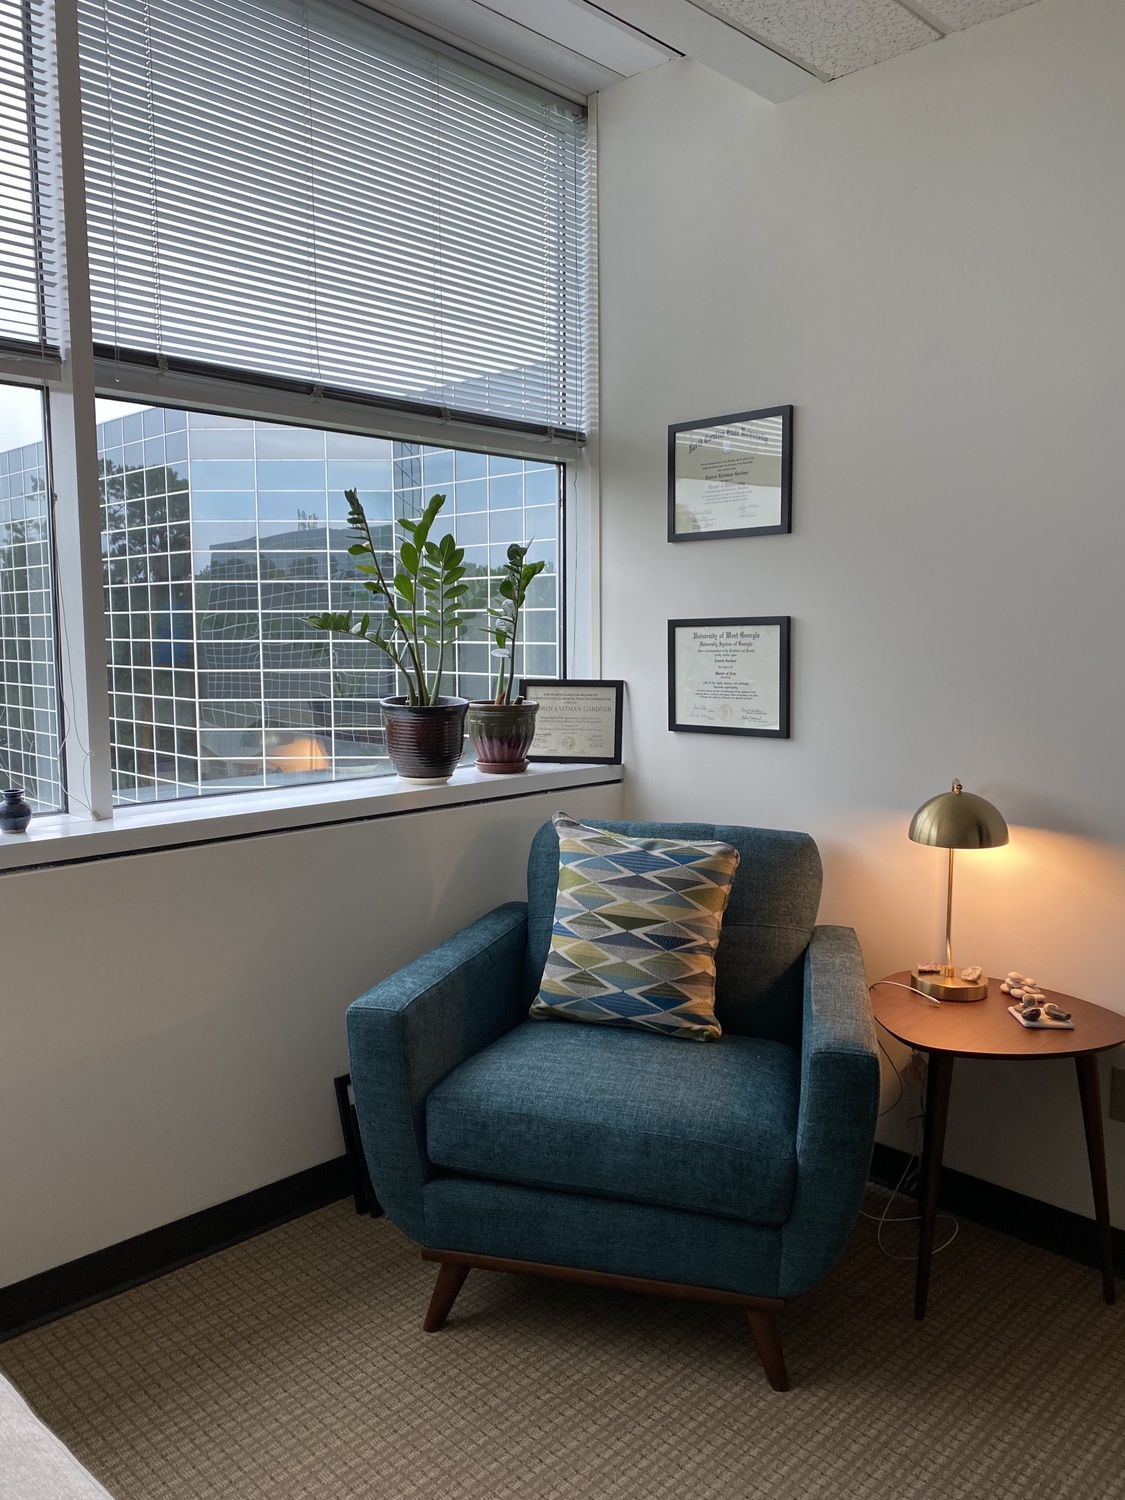 Gallery Photo of Therapy office view